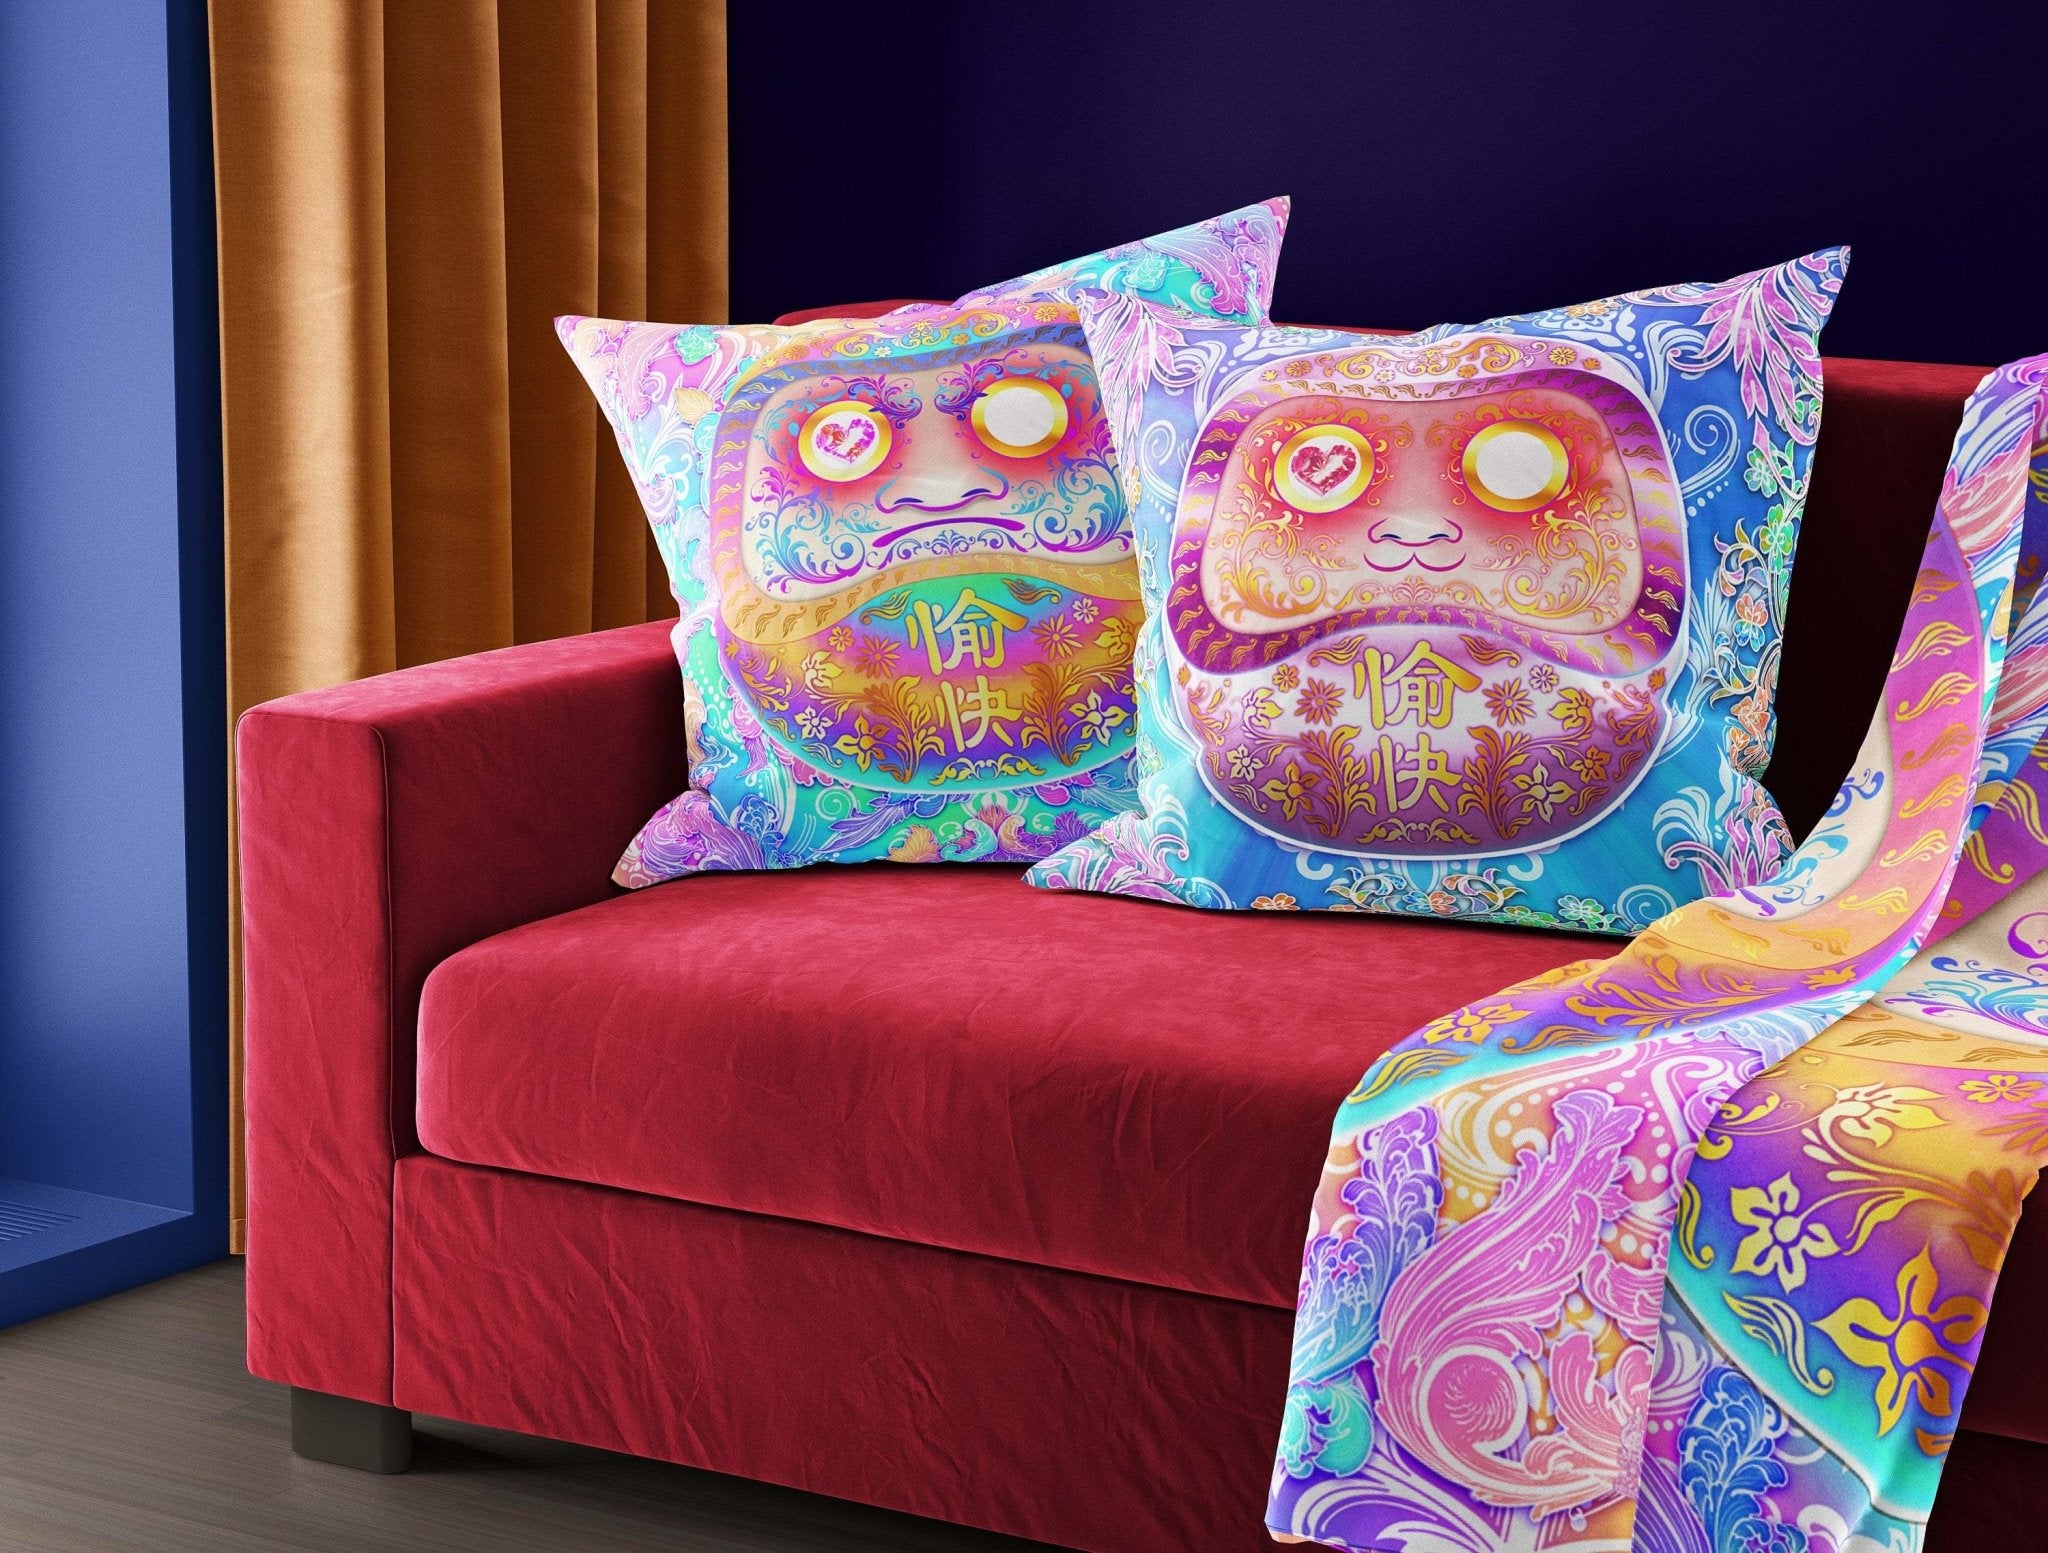 Holographic Throw Pillow, Decorative Accent Cushion, Funny, Aesthetic and Psychedelic Room Decor, Fairy Kei and Yume Kawaii style, Funky and Eclectic Home - Pastel Daruma - Abysm Internal